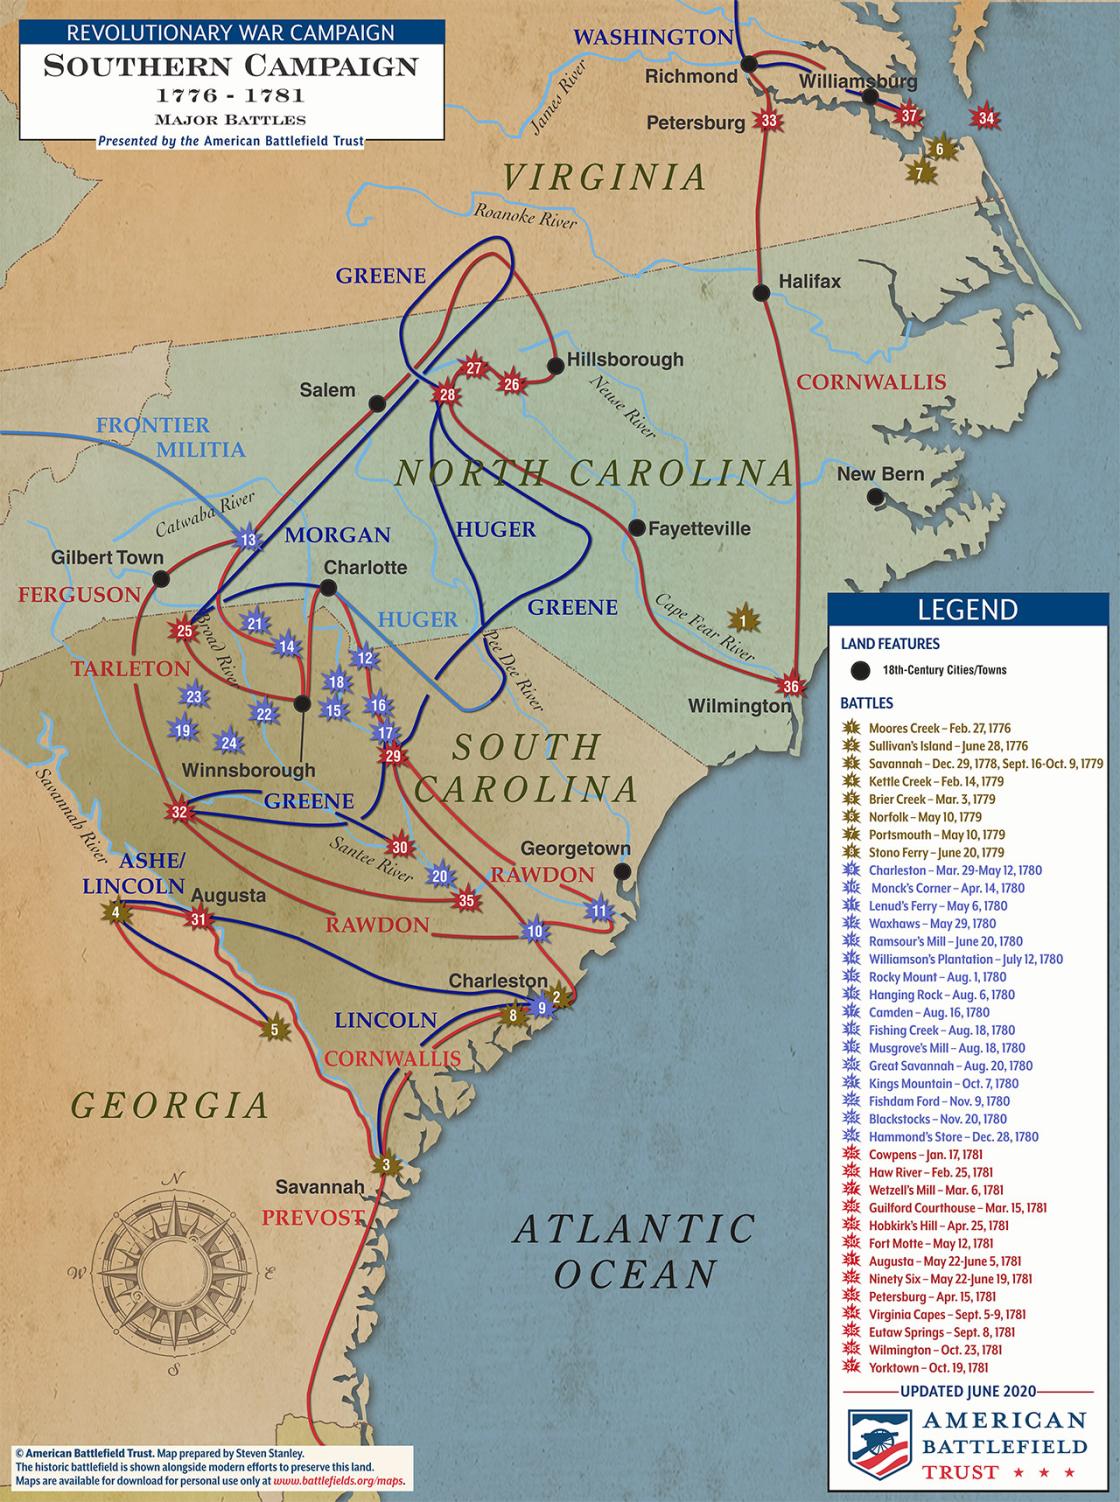 Major Battles of the Southern Campaign | 1776 - 1781 (June 2020)